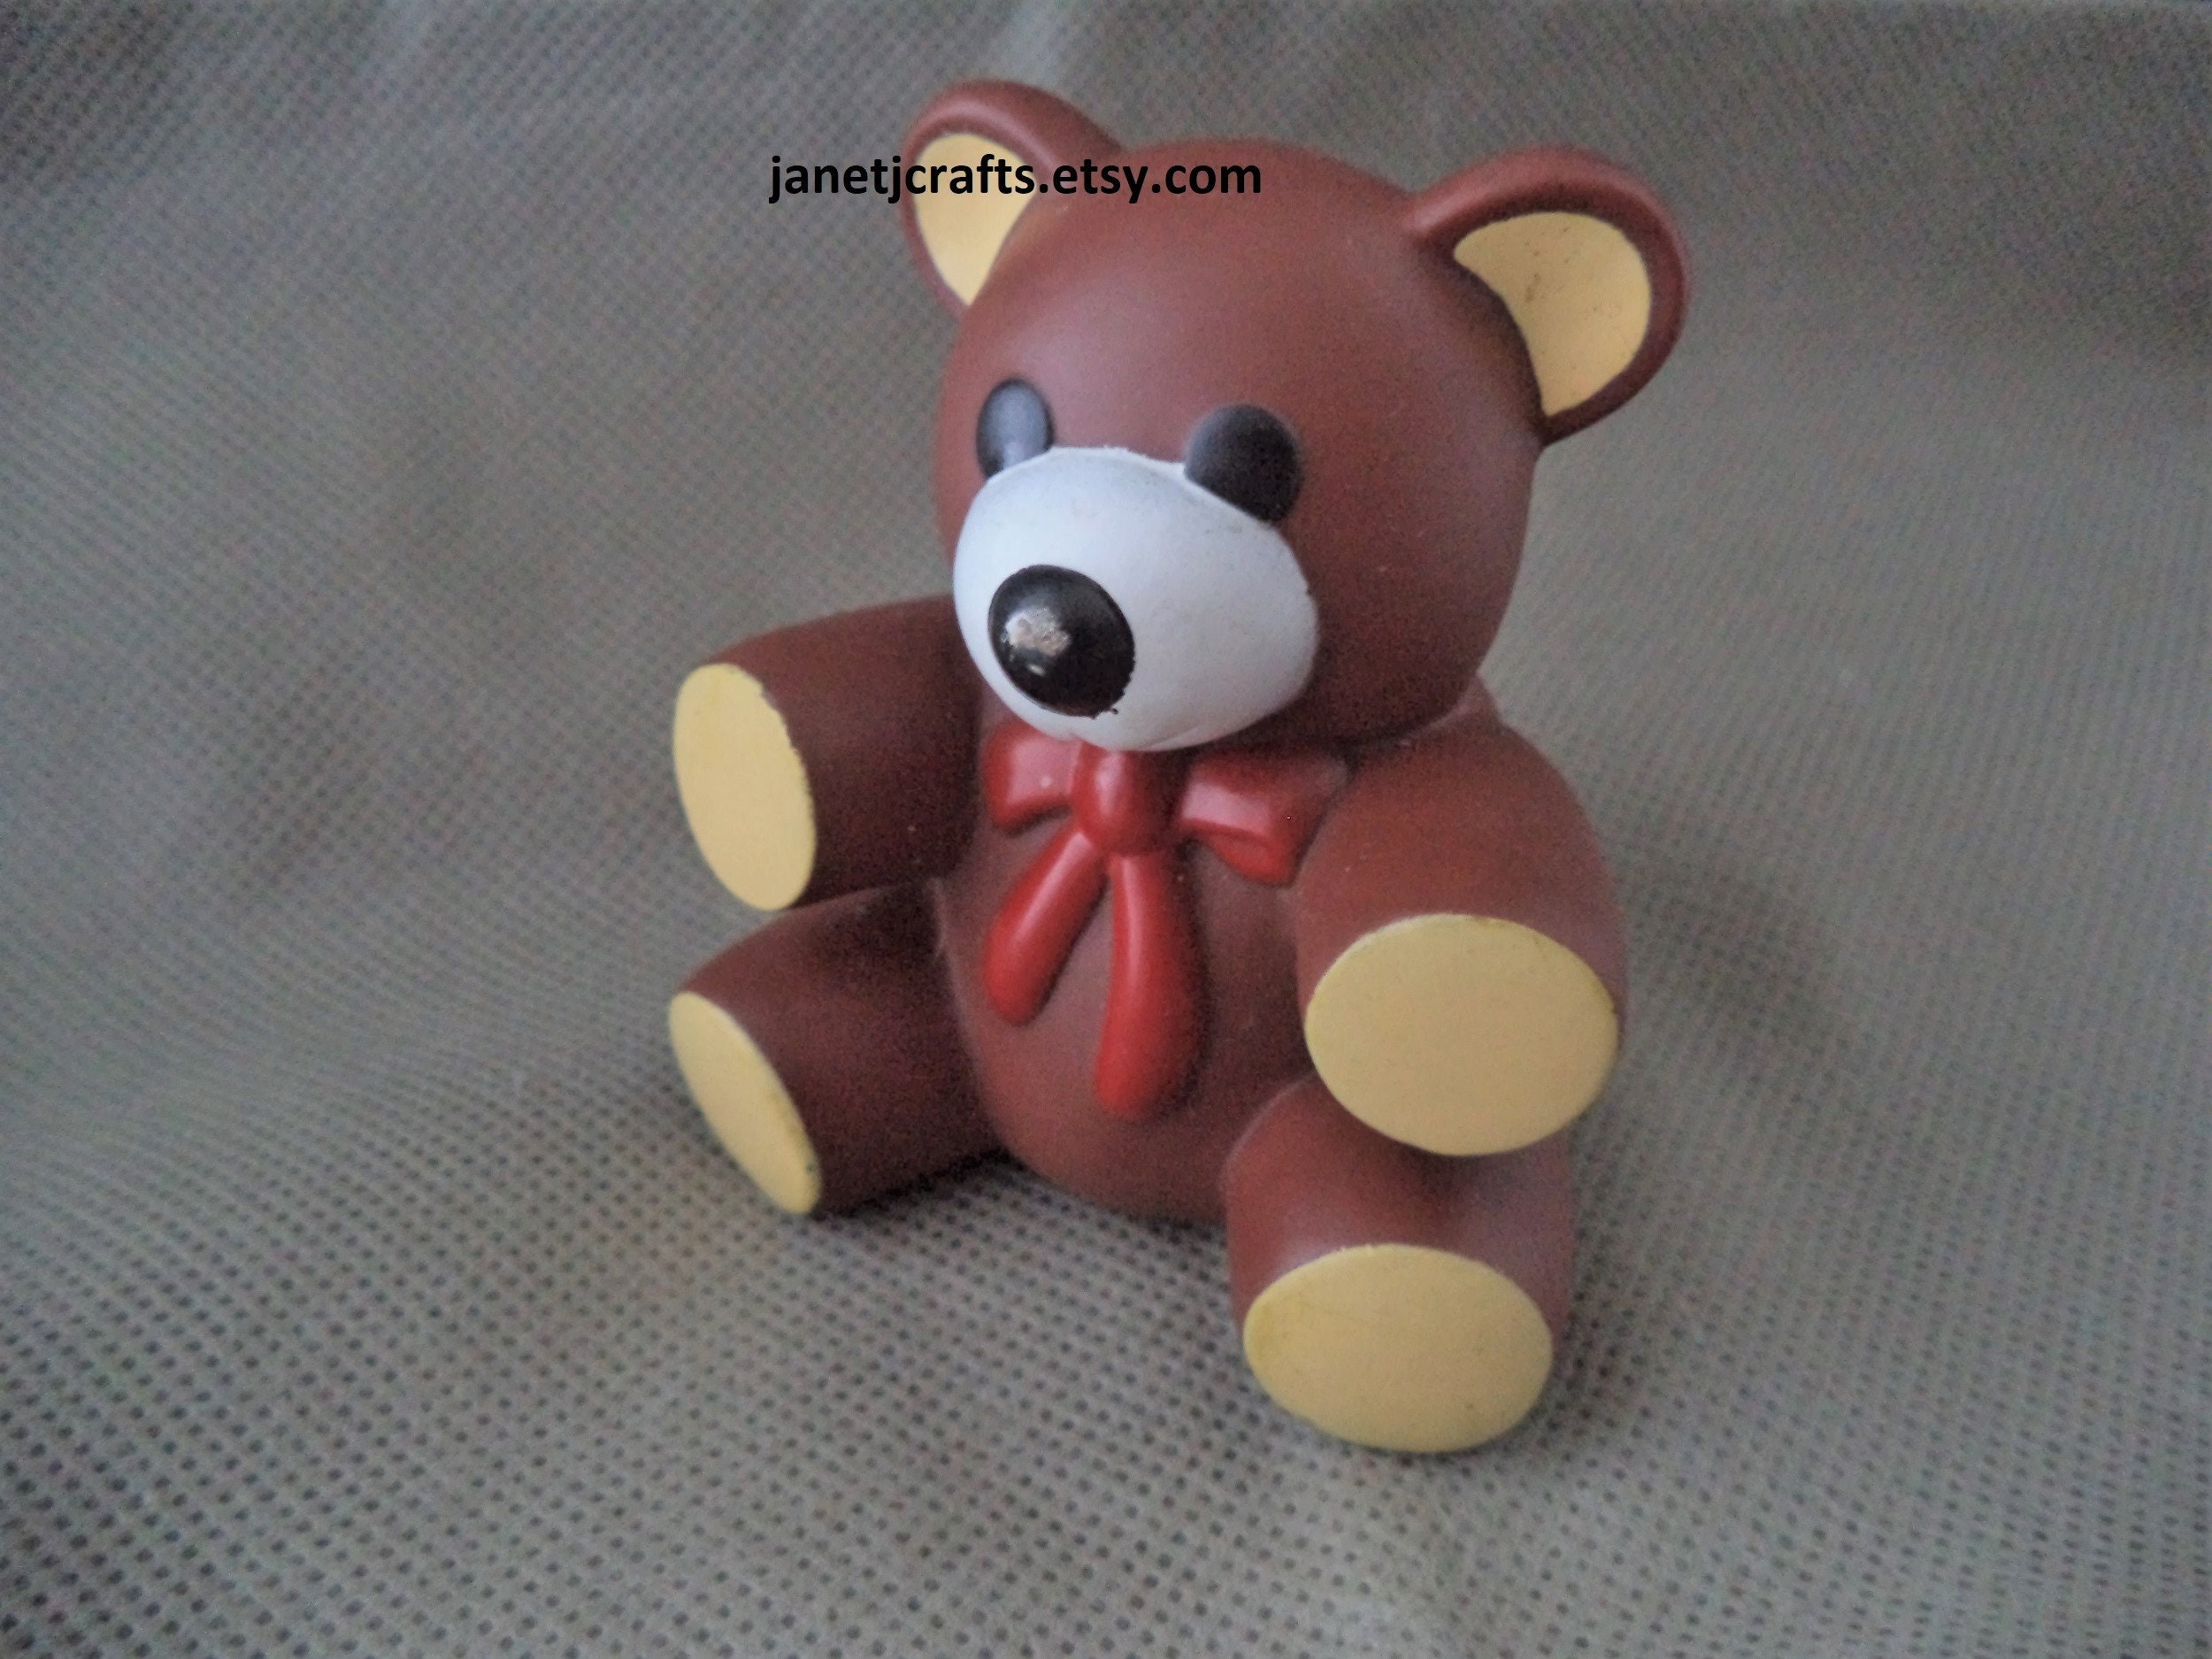 1985 Plastic/Vinyl-Bear-Baby Squeaky Toy-Vintage-Ross Laboratories-Collectible 